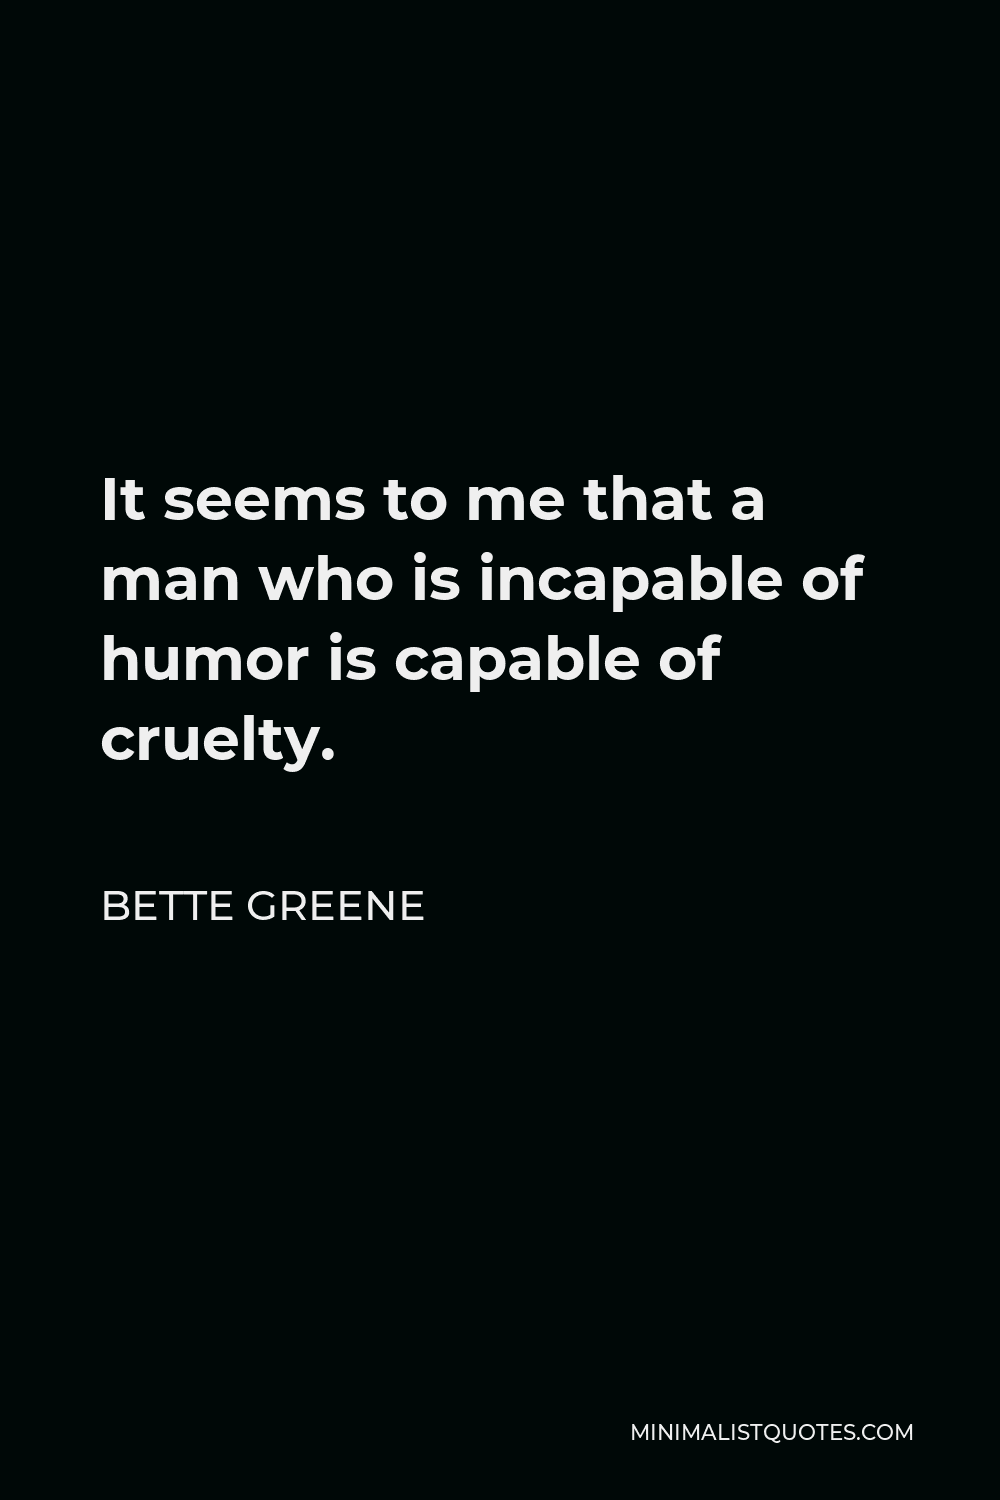 Bette Greene Quote - It seems to me that a man who is incapable of humor is capable of cruelty.